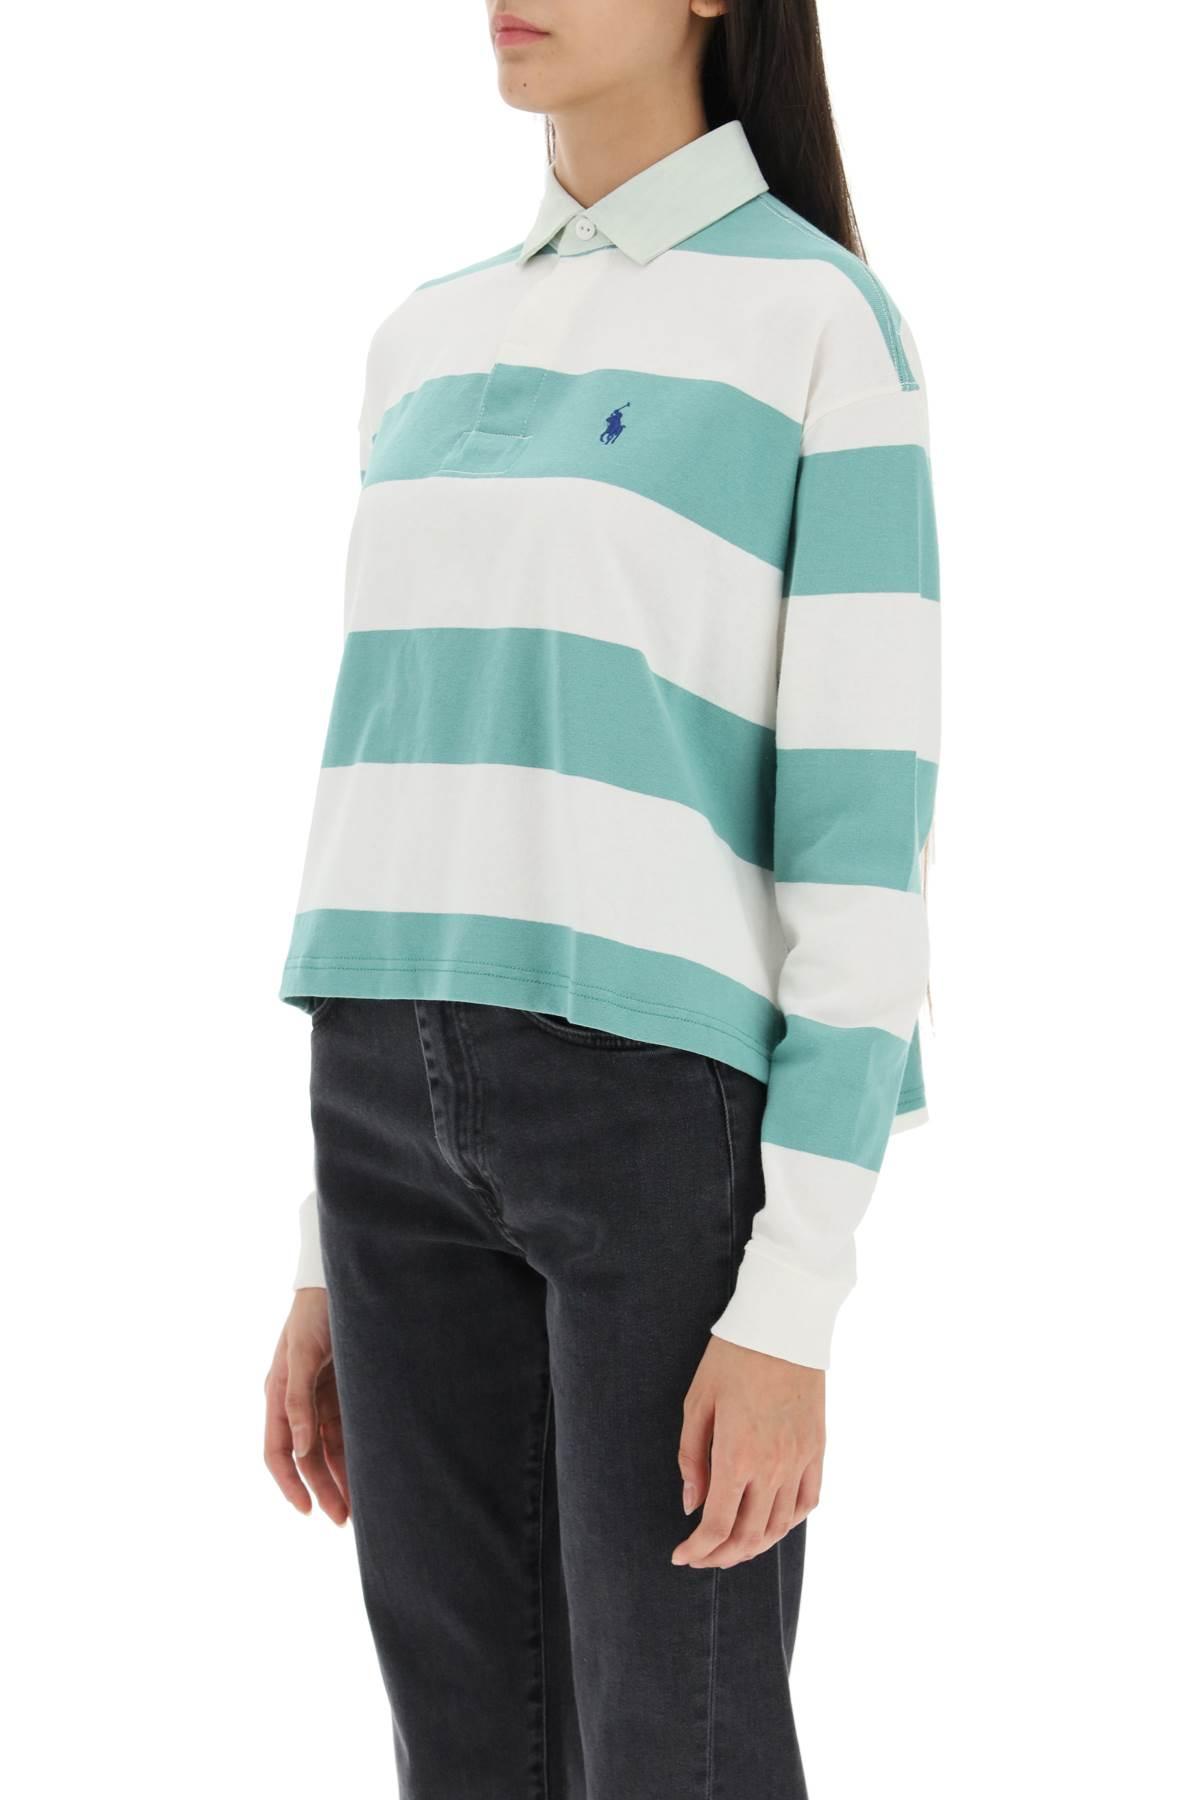 Polo Ralph Lauren Cropped Striped Polo Shirt in Blue | Lyst